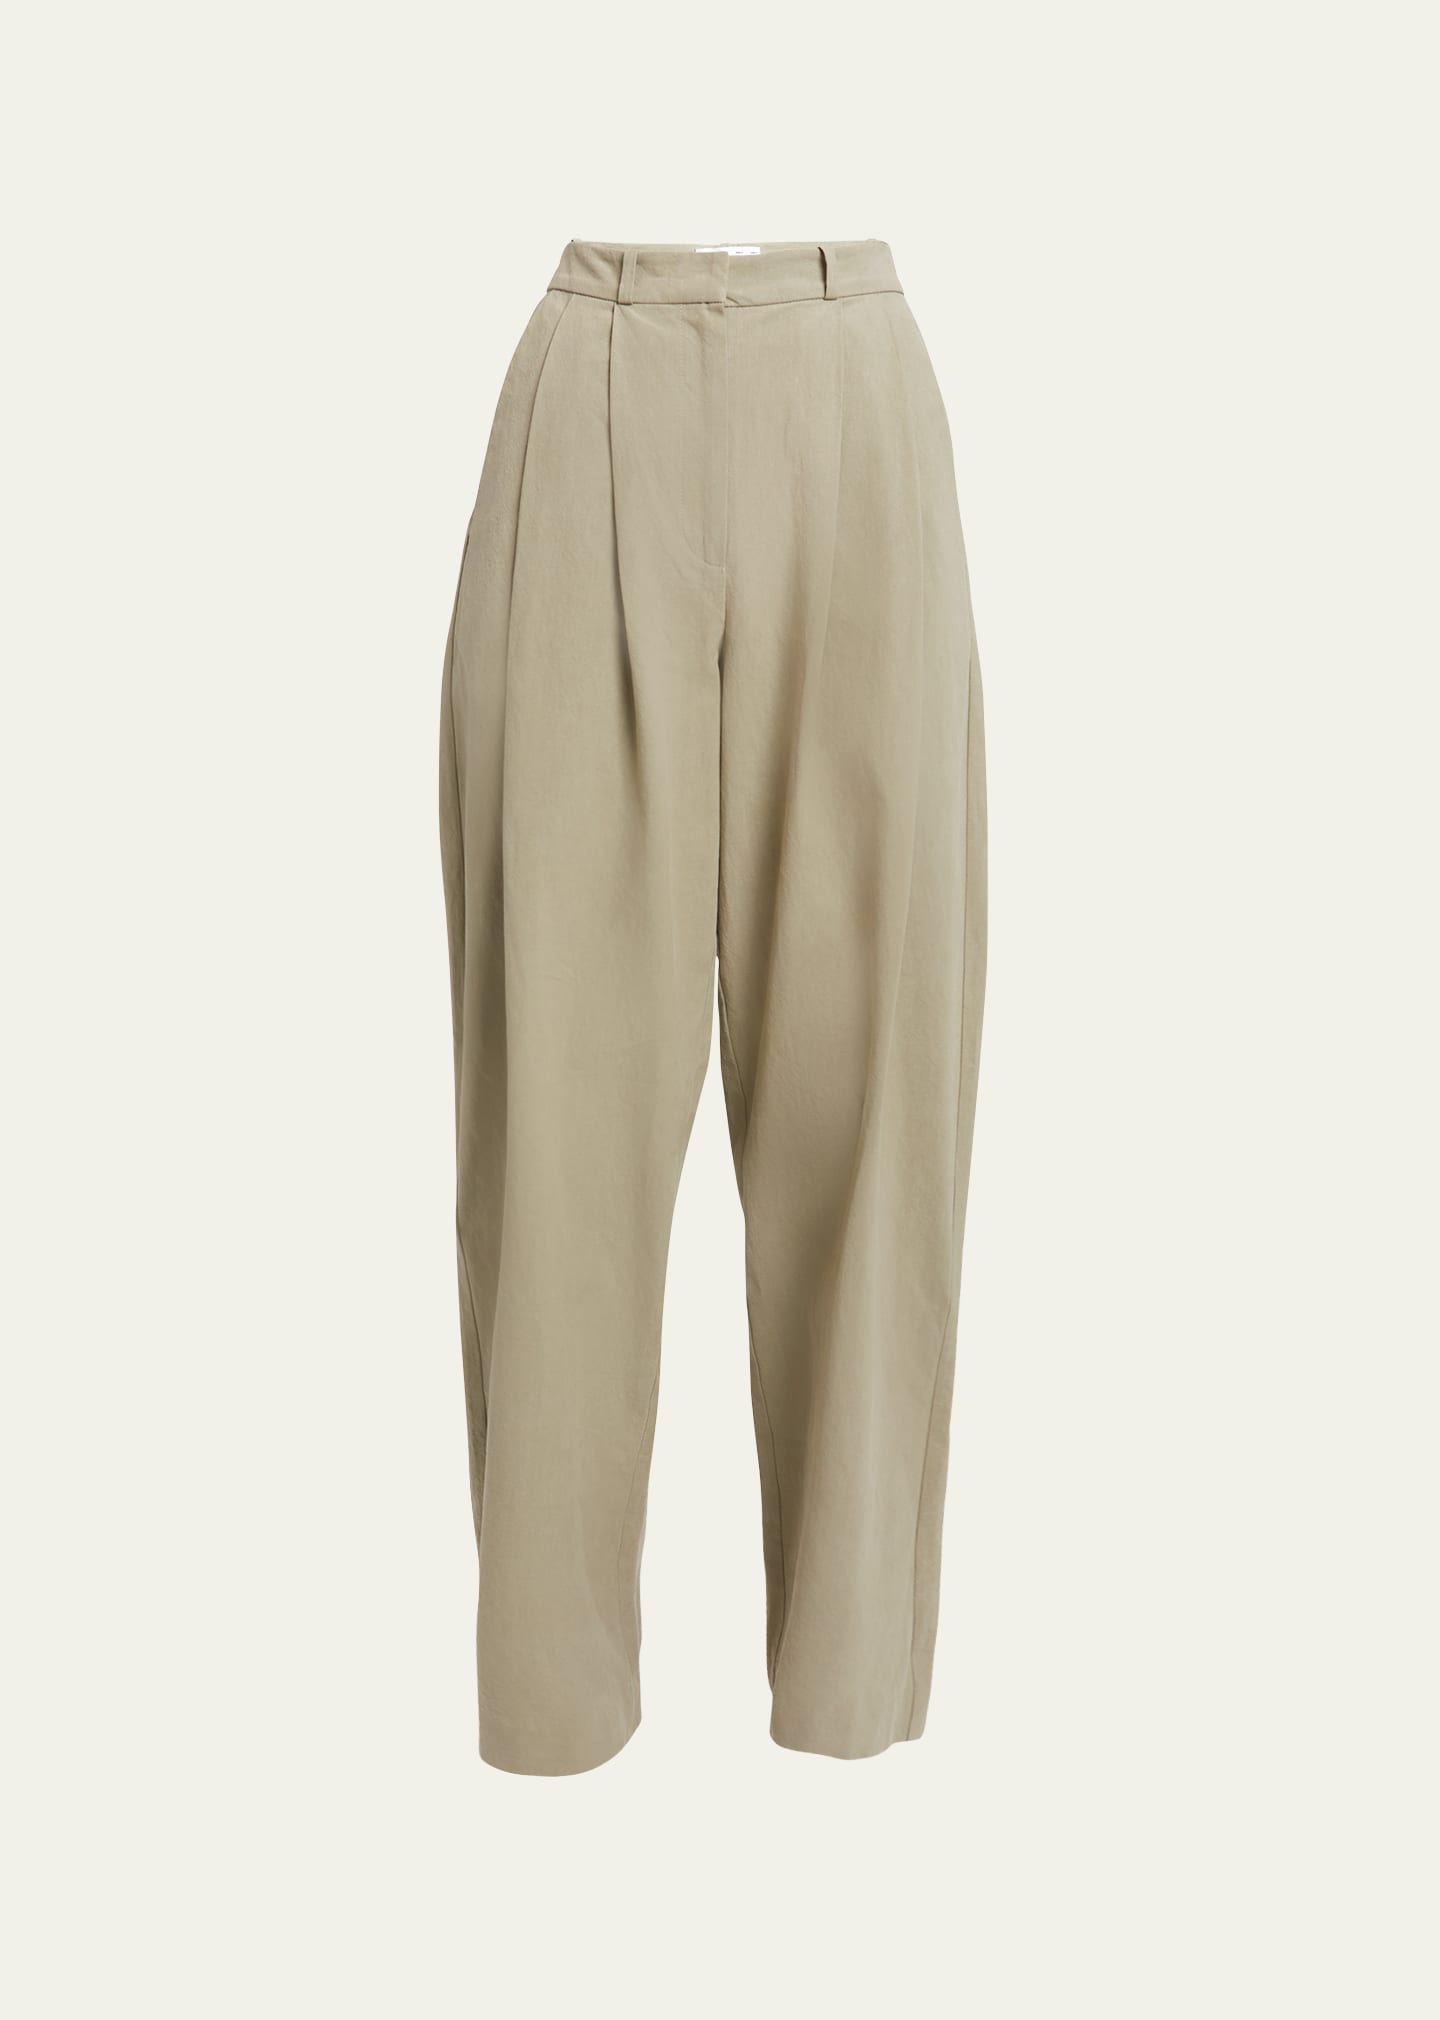 Proenza Schouler White Label Amber Pleated Cotton-hemp Pants In Bayleaf